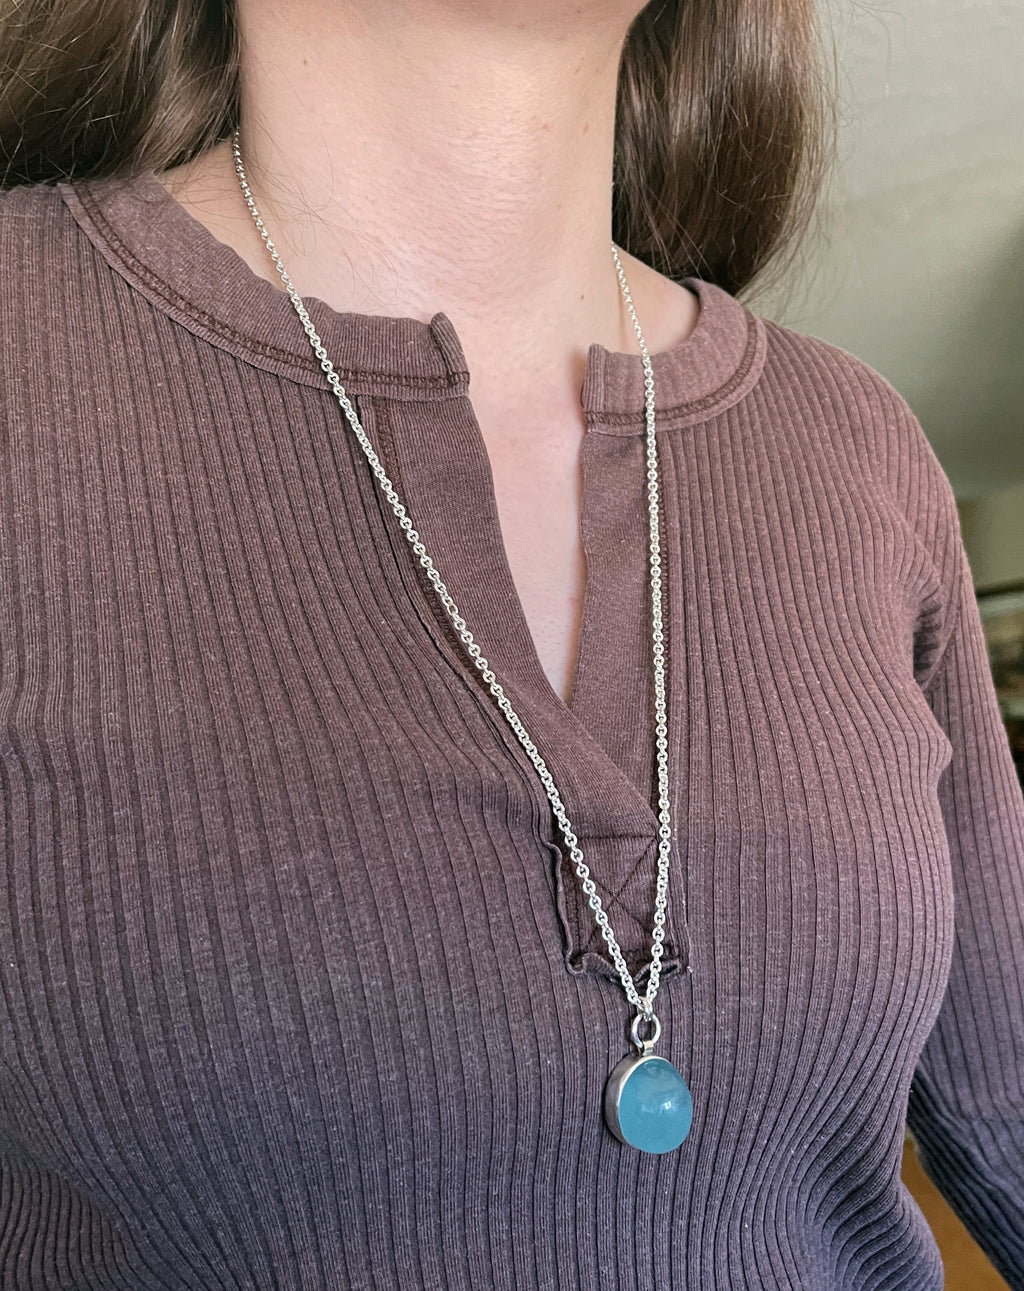 Aquamarine Necklace in Sterling Silver with 28" Long Infinity Chain, Gemstone Necklace on Long Chain, Layering Necklace